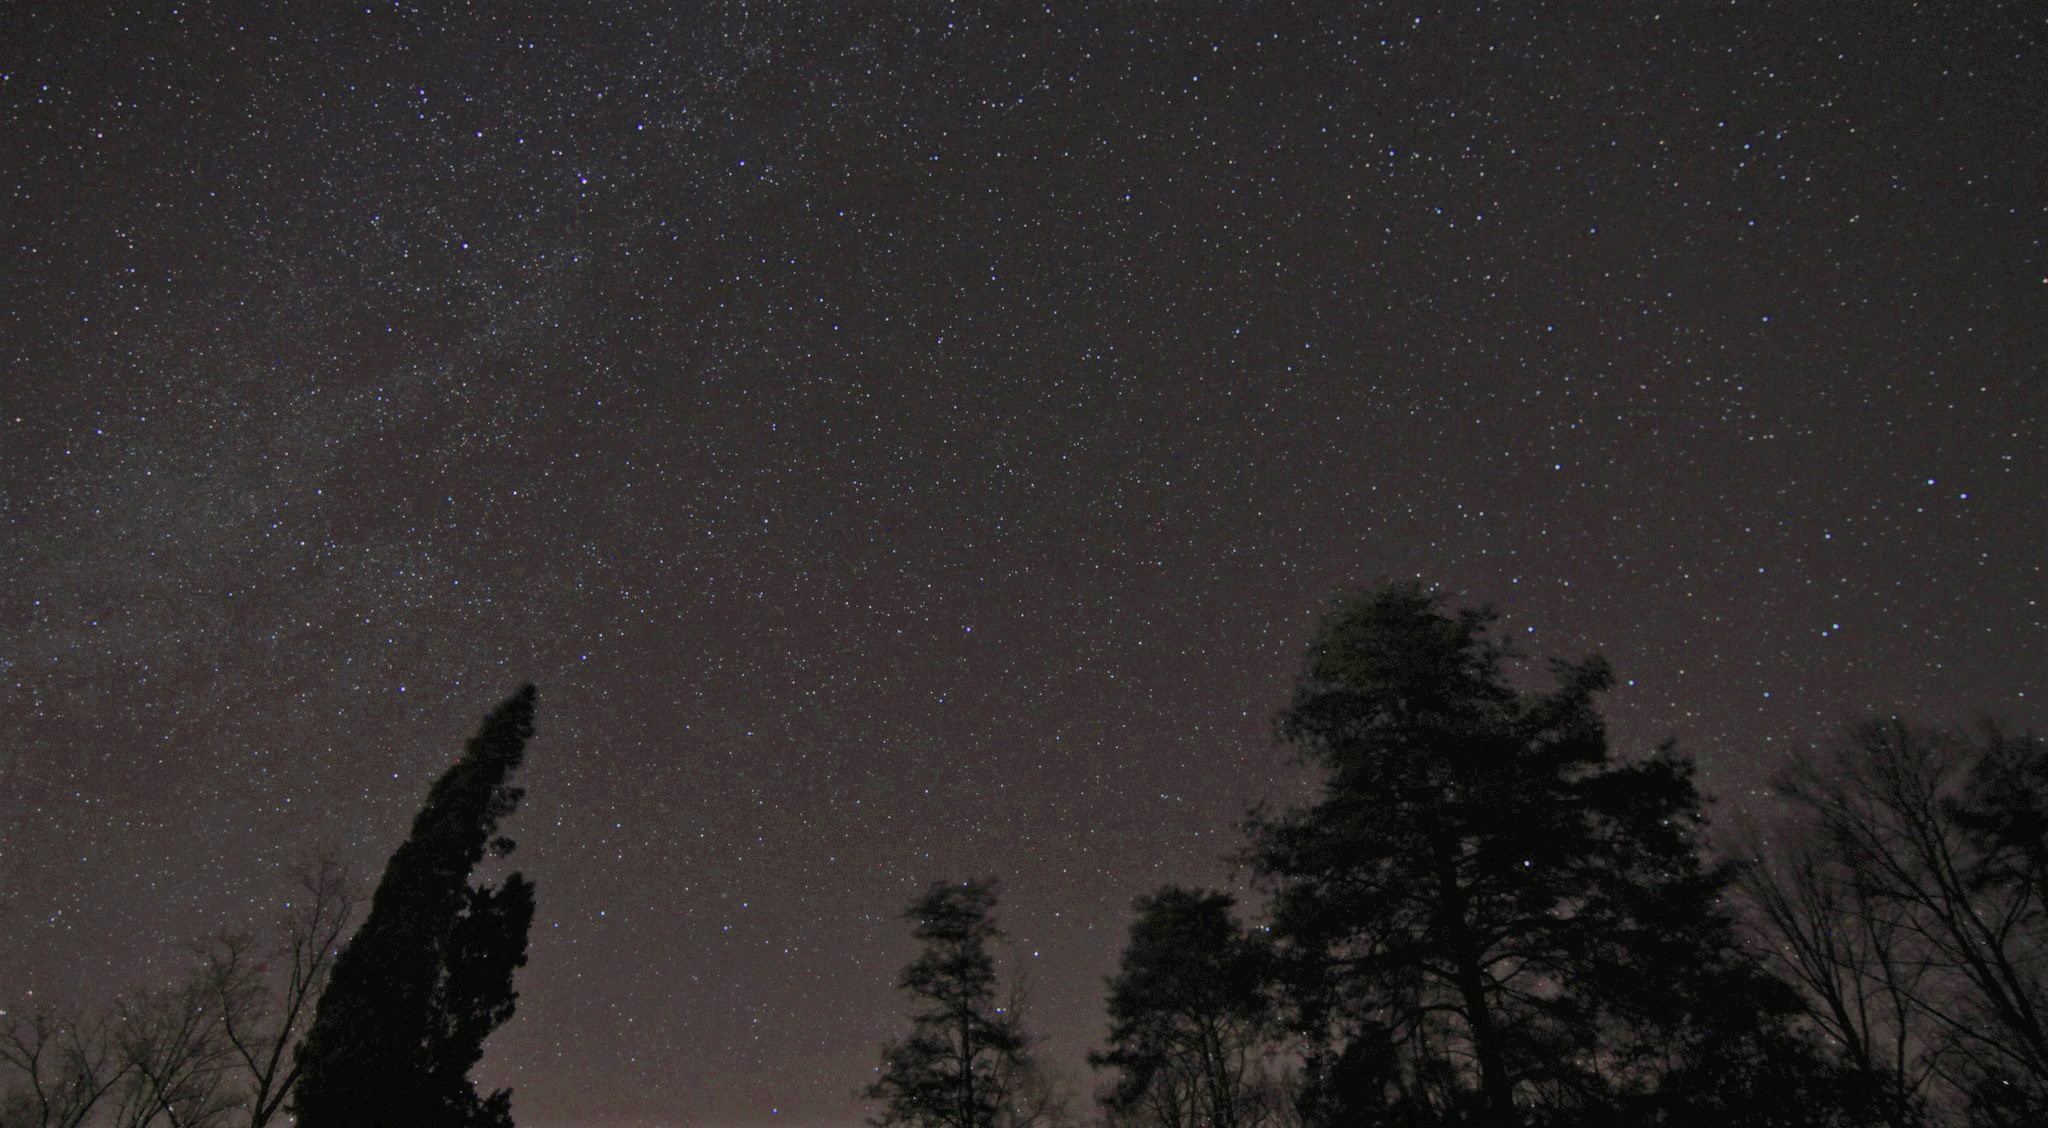 Thousands of tiny white dotted stars appear across a dark black sky.